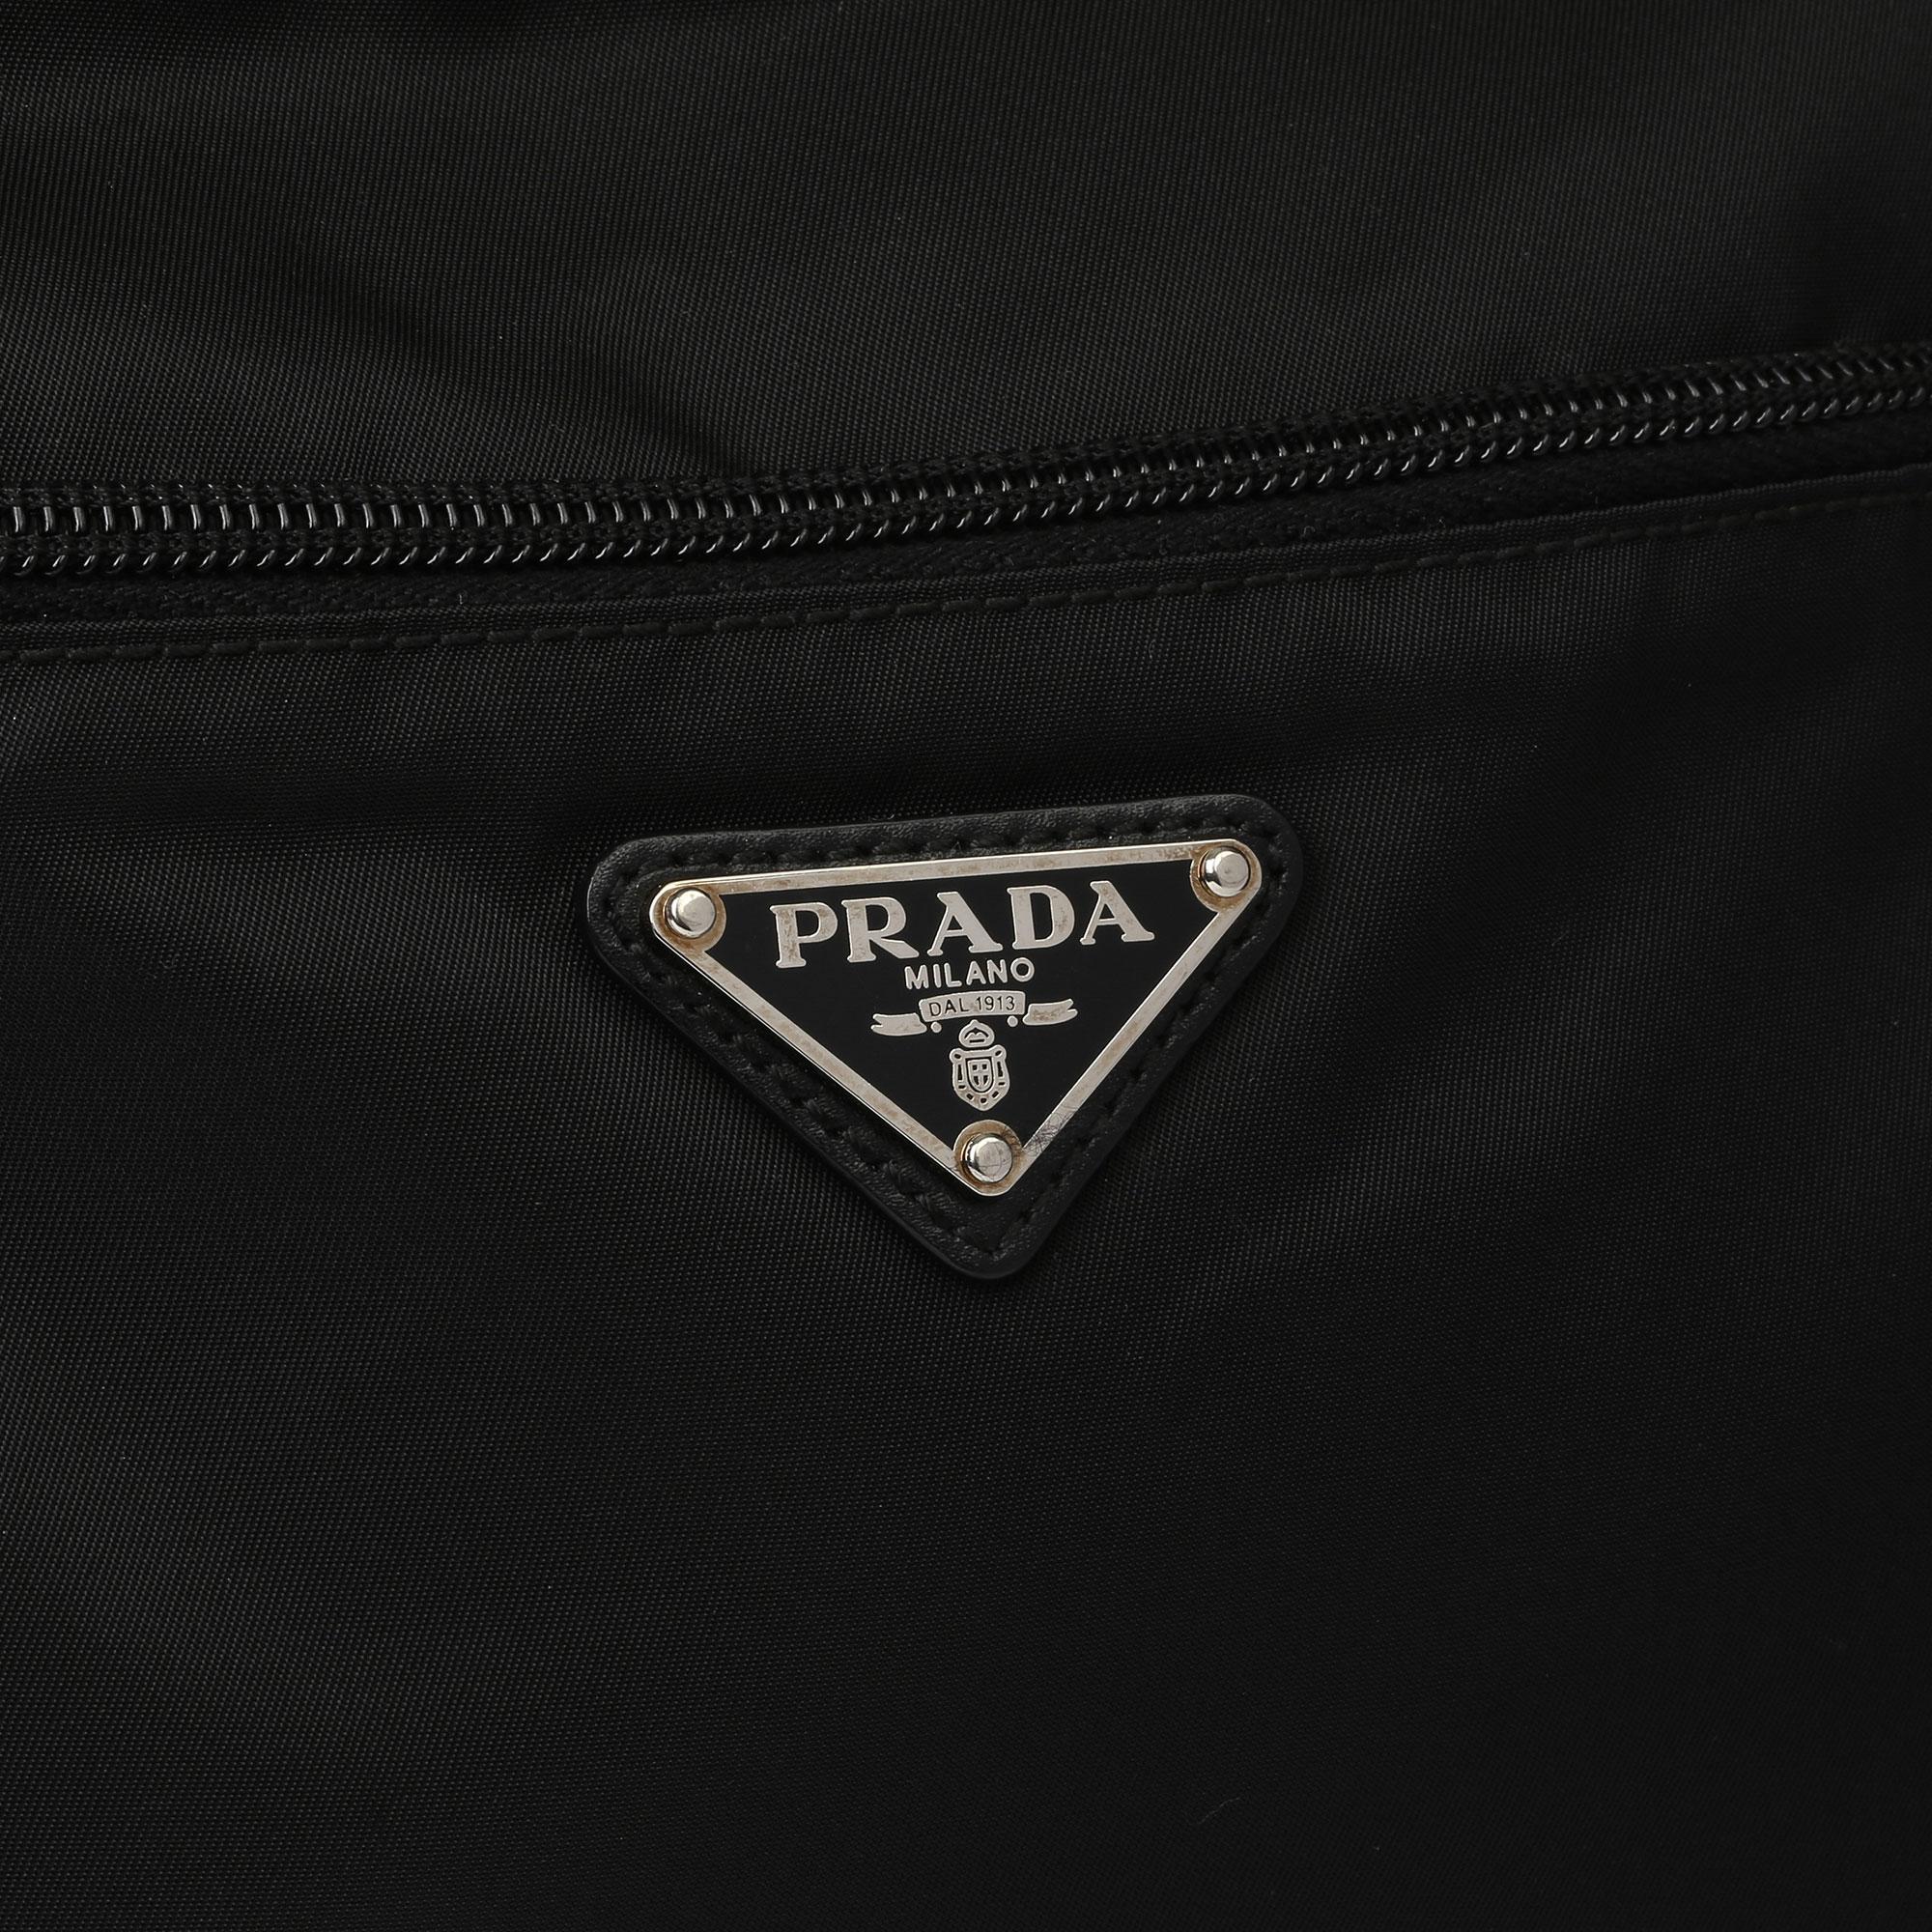 PRADA
Black Nylon & Calfskin Leather Camera Bag

Xupes Reference: HB3967
Serial Number: 165
Age (Circa): 2010
Accompanied By: Prada Dust Bag
Authenticity Details: Serial Tag (Made in Italy)
Gender: Unisex
Type: Shoulder, Crossbody

Colour: